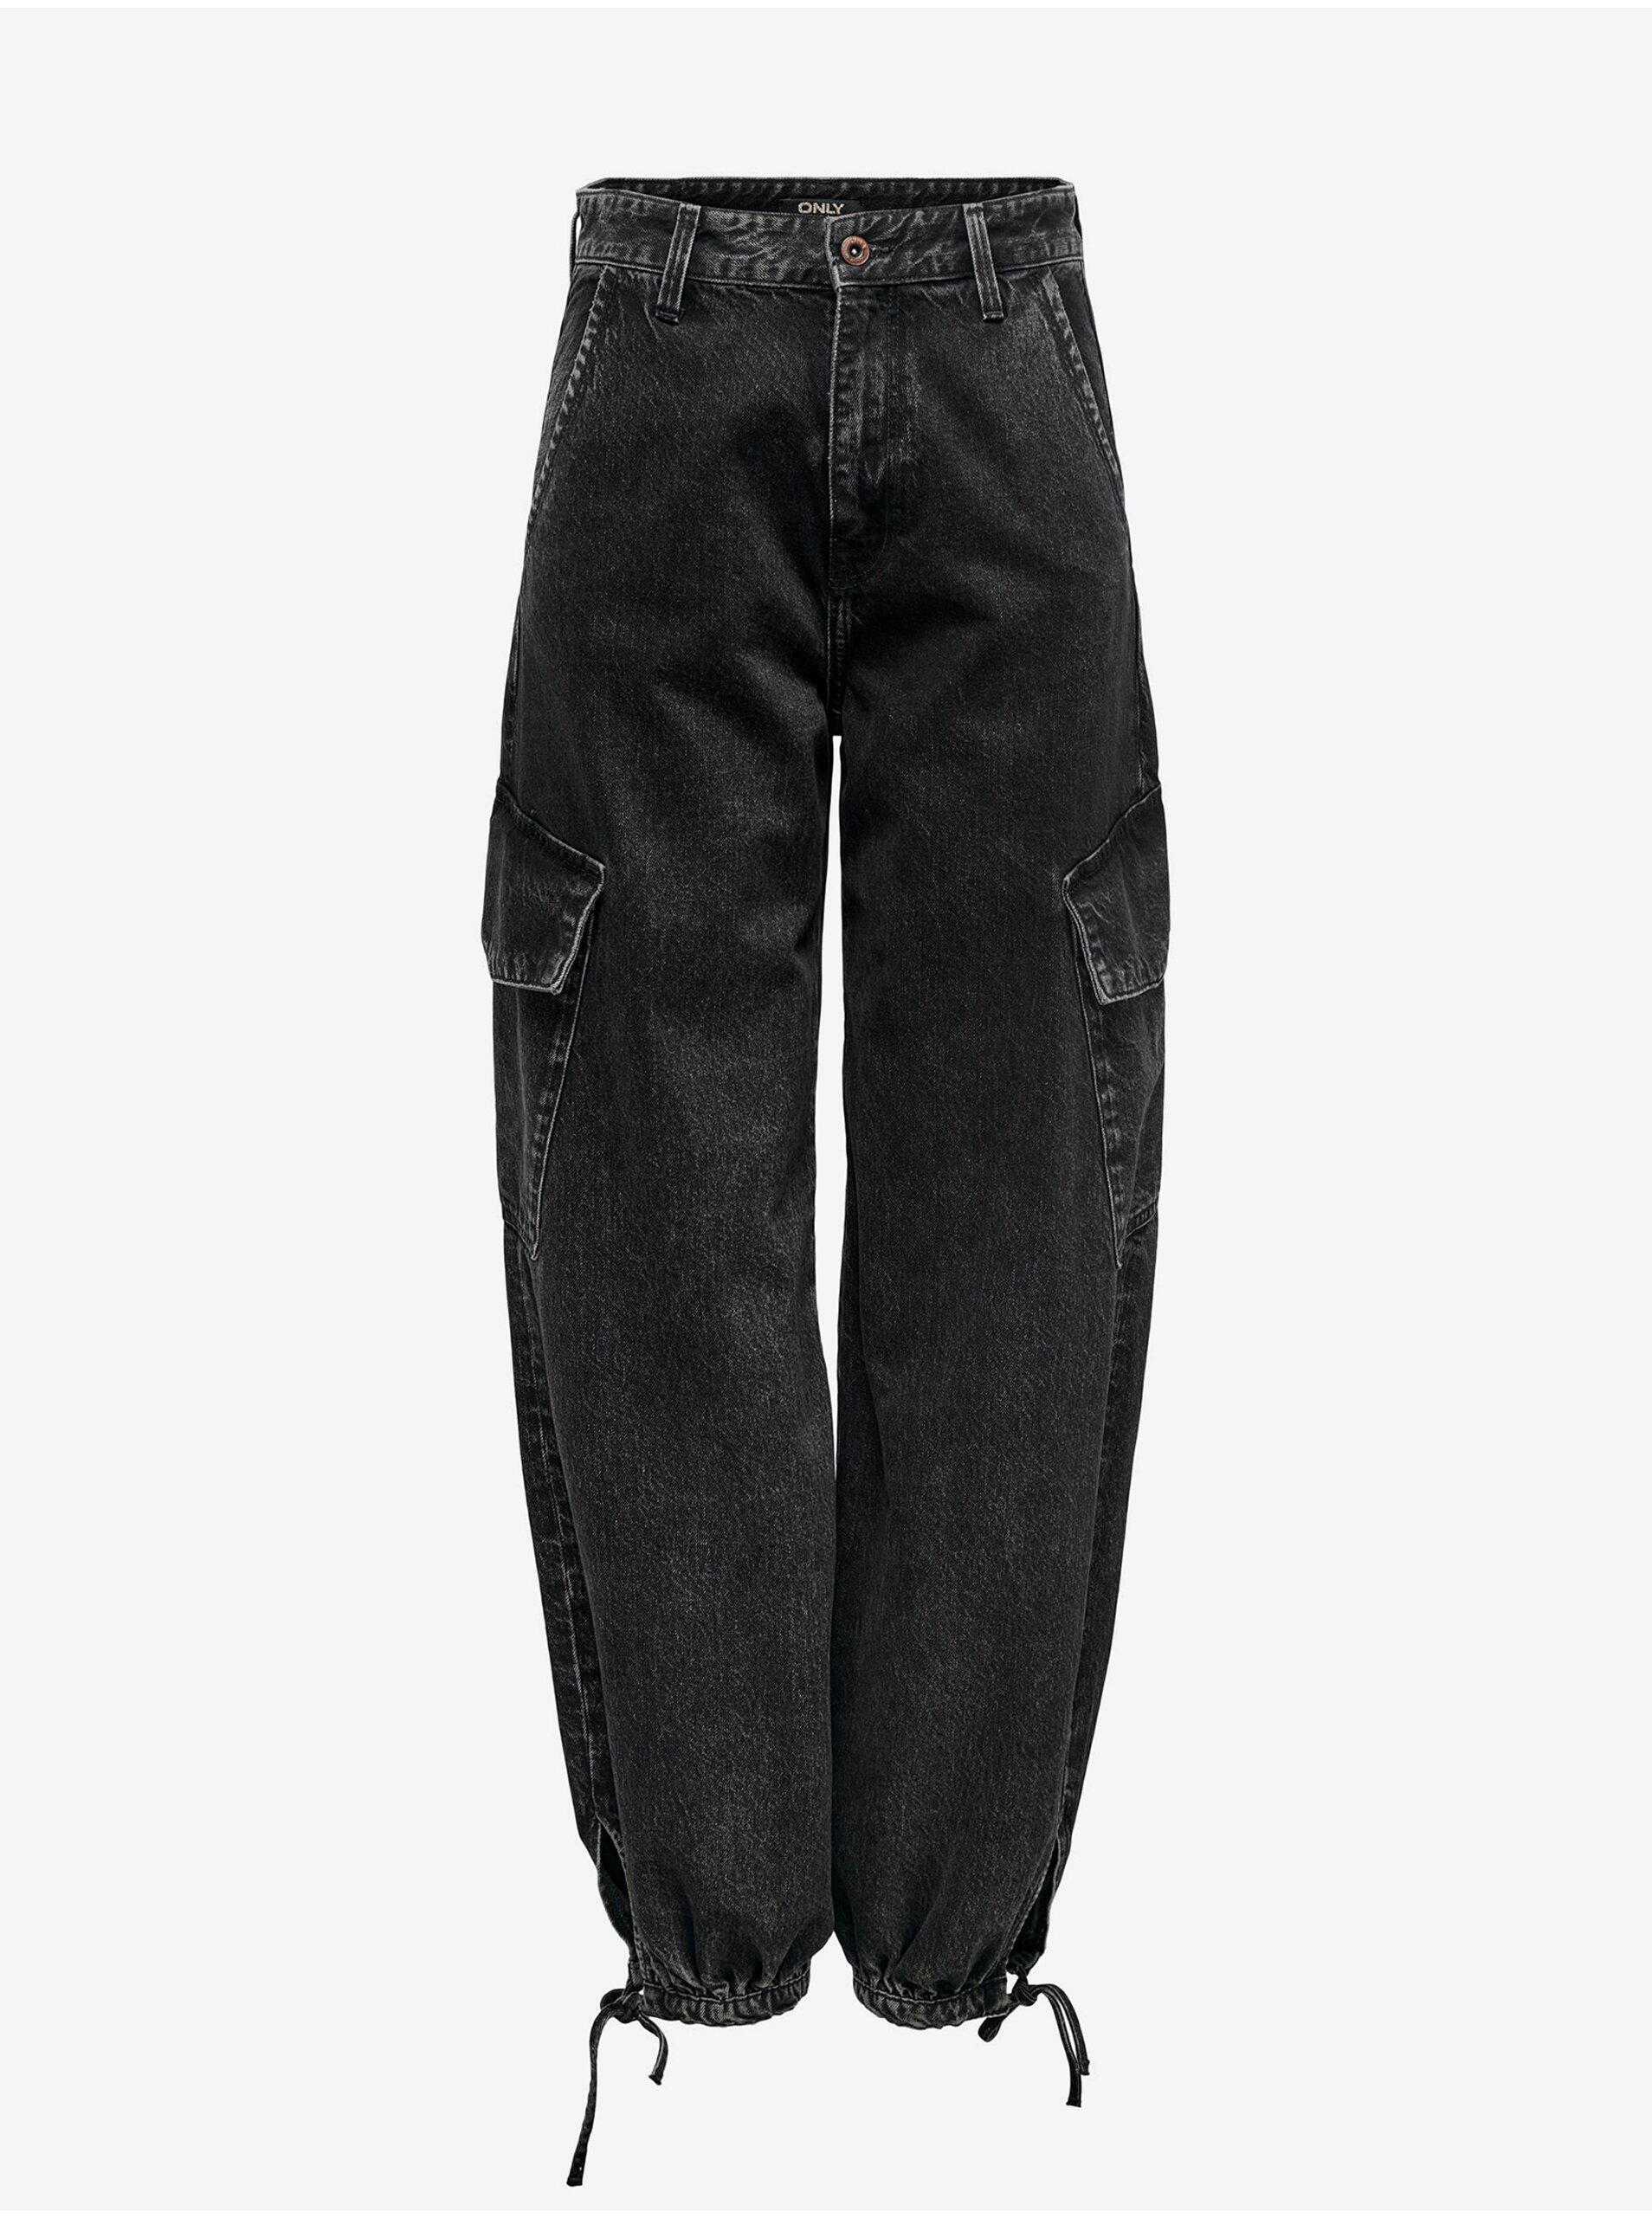 Black Women's Jeans with Jean Pockets ONLY Pernille - Women